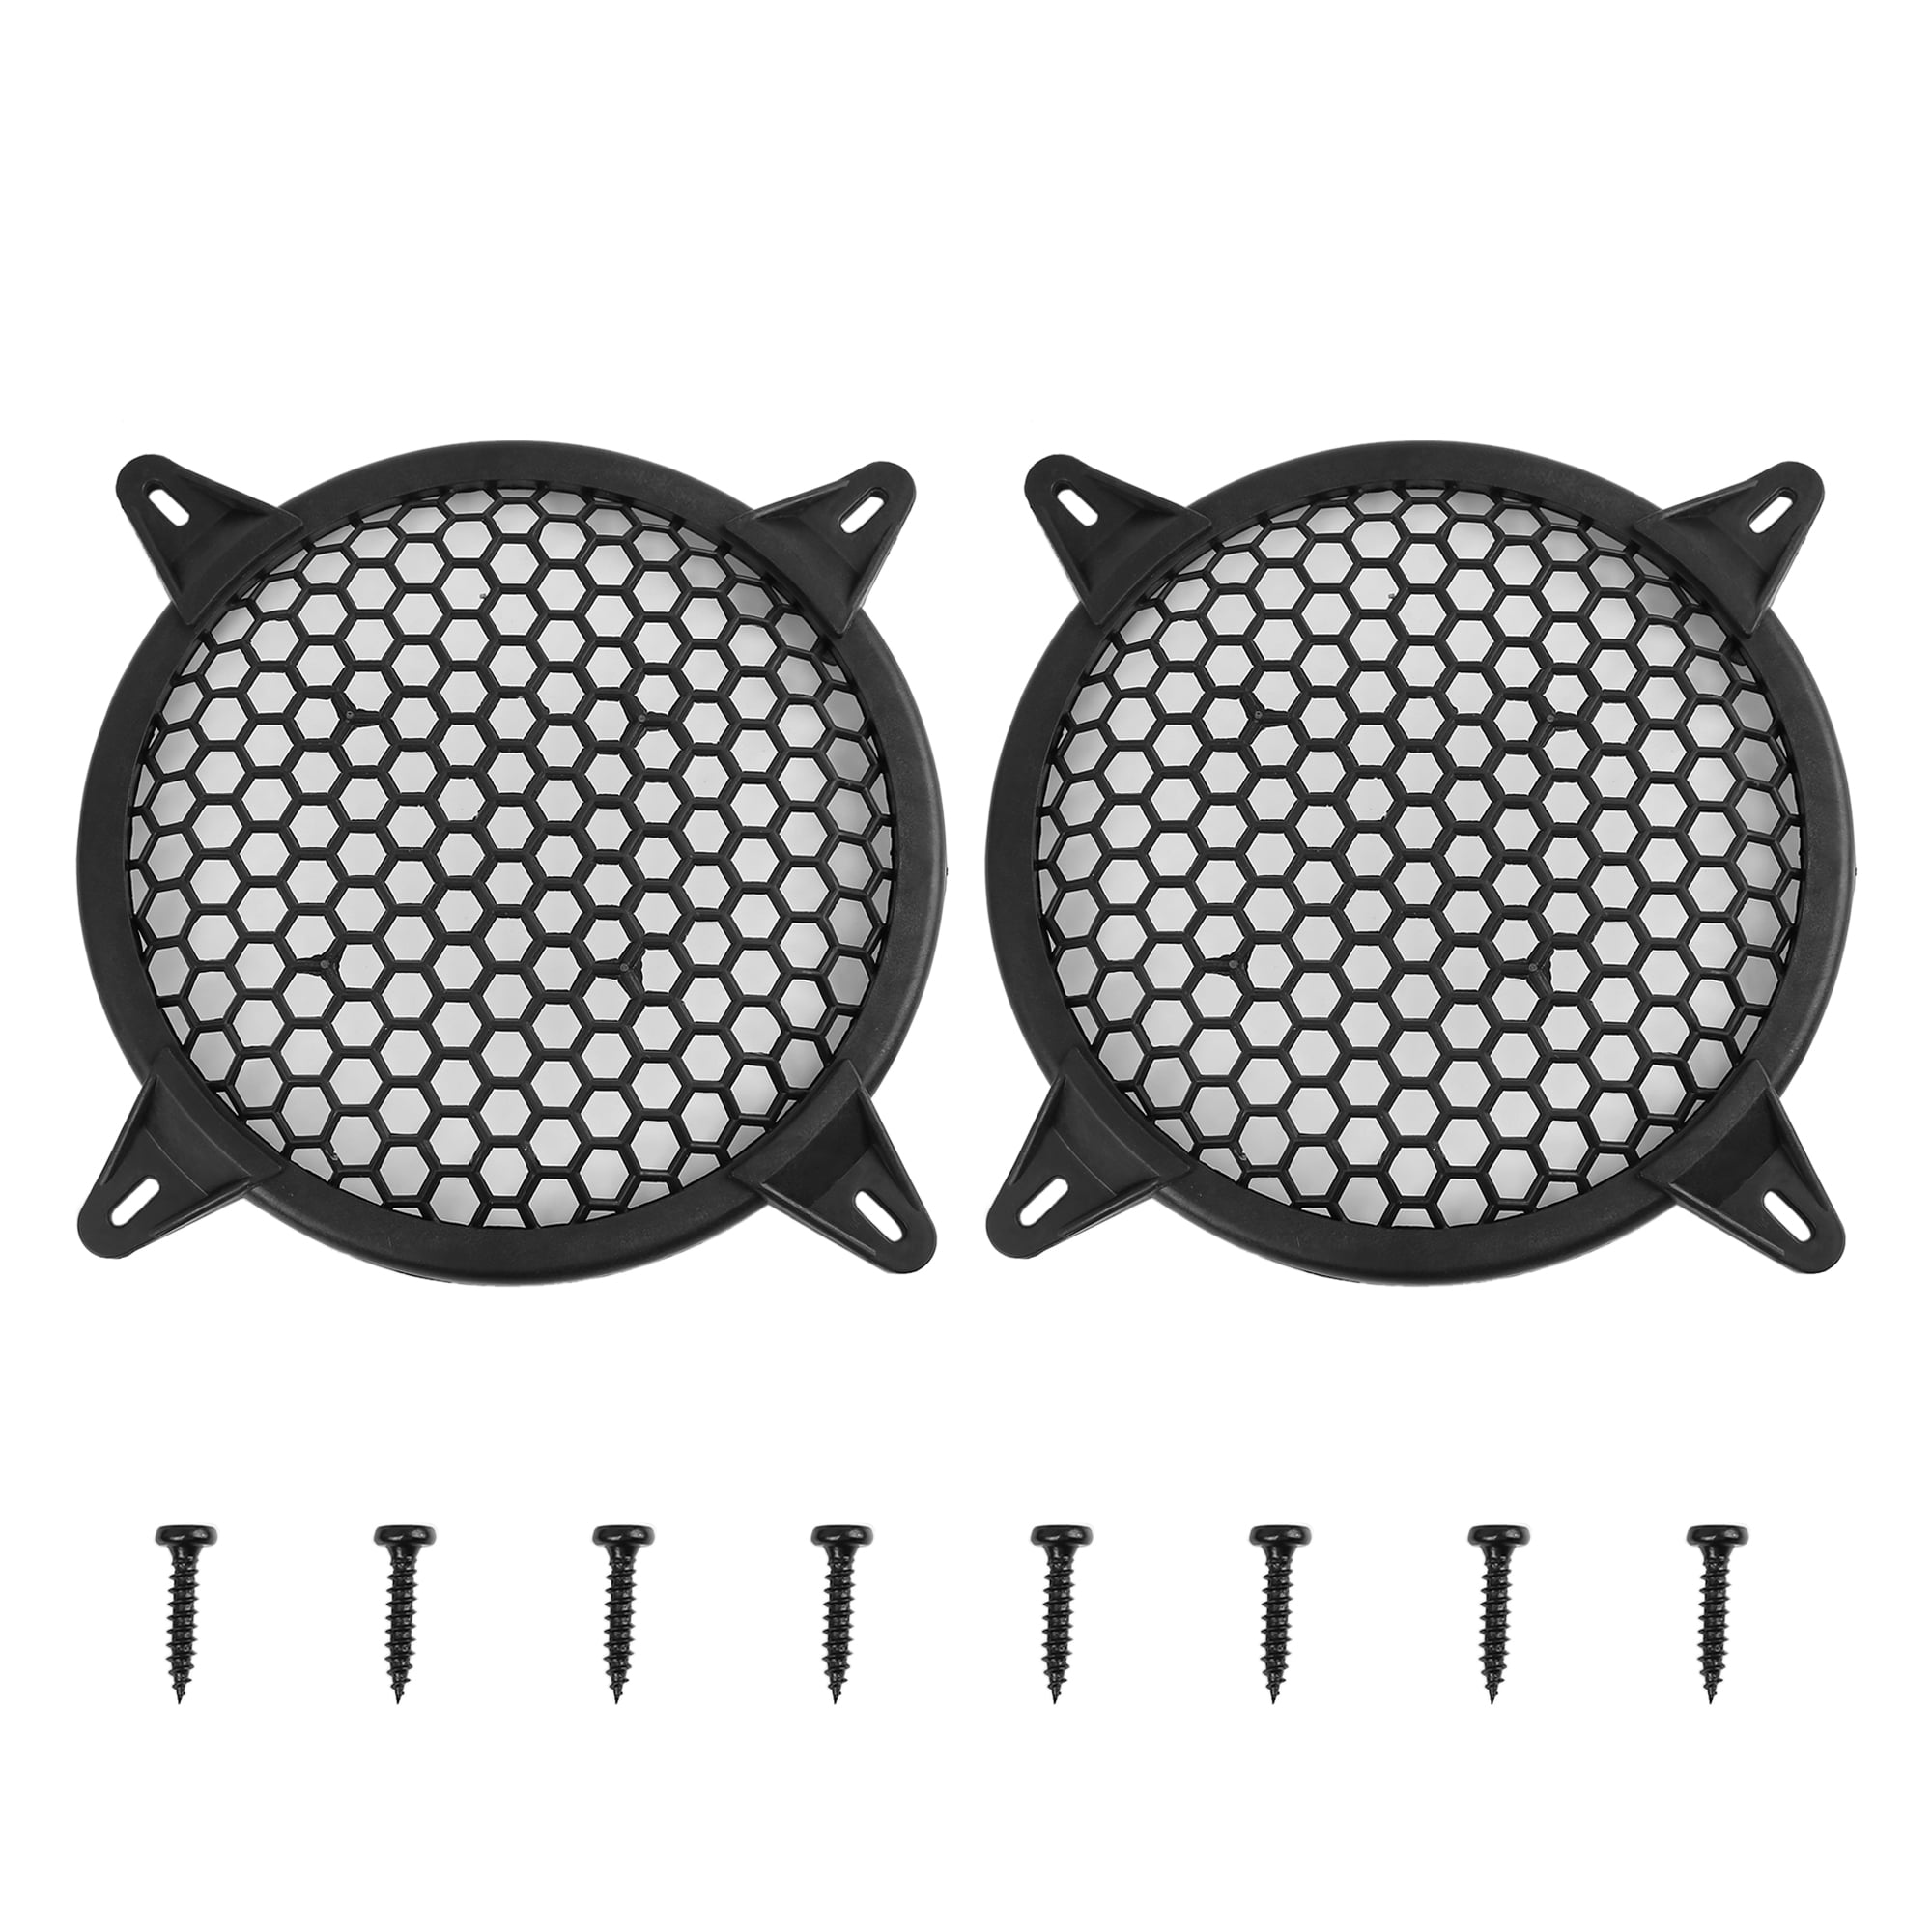 2pcs 5"x7" inch Car Speaker Cover Decorative Circle Metal Mesh Grille Protection 